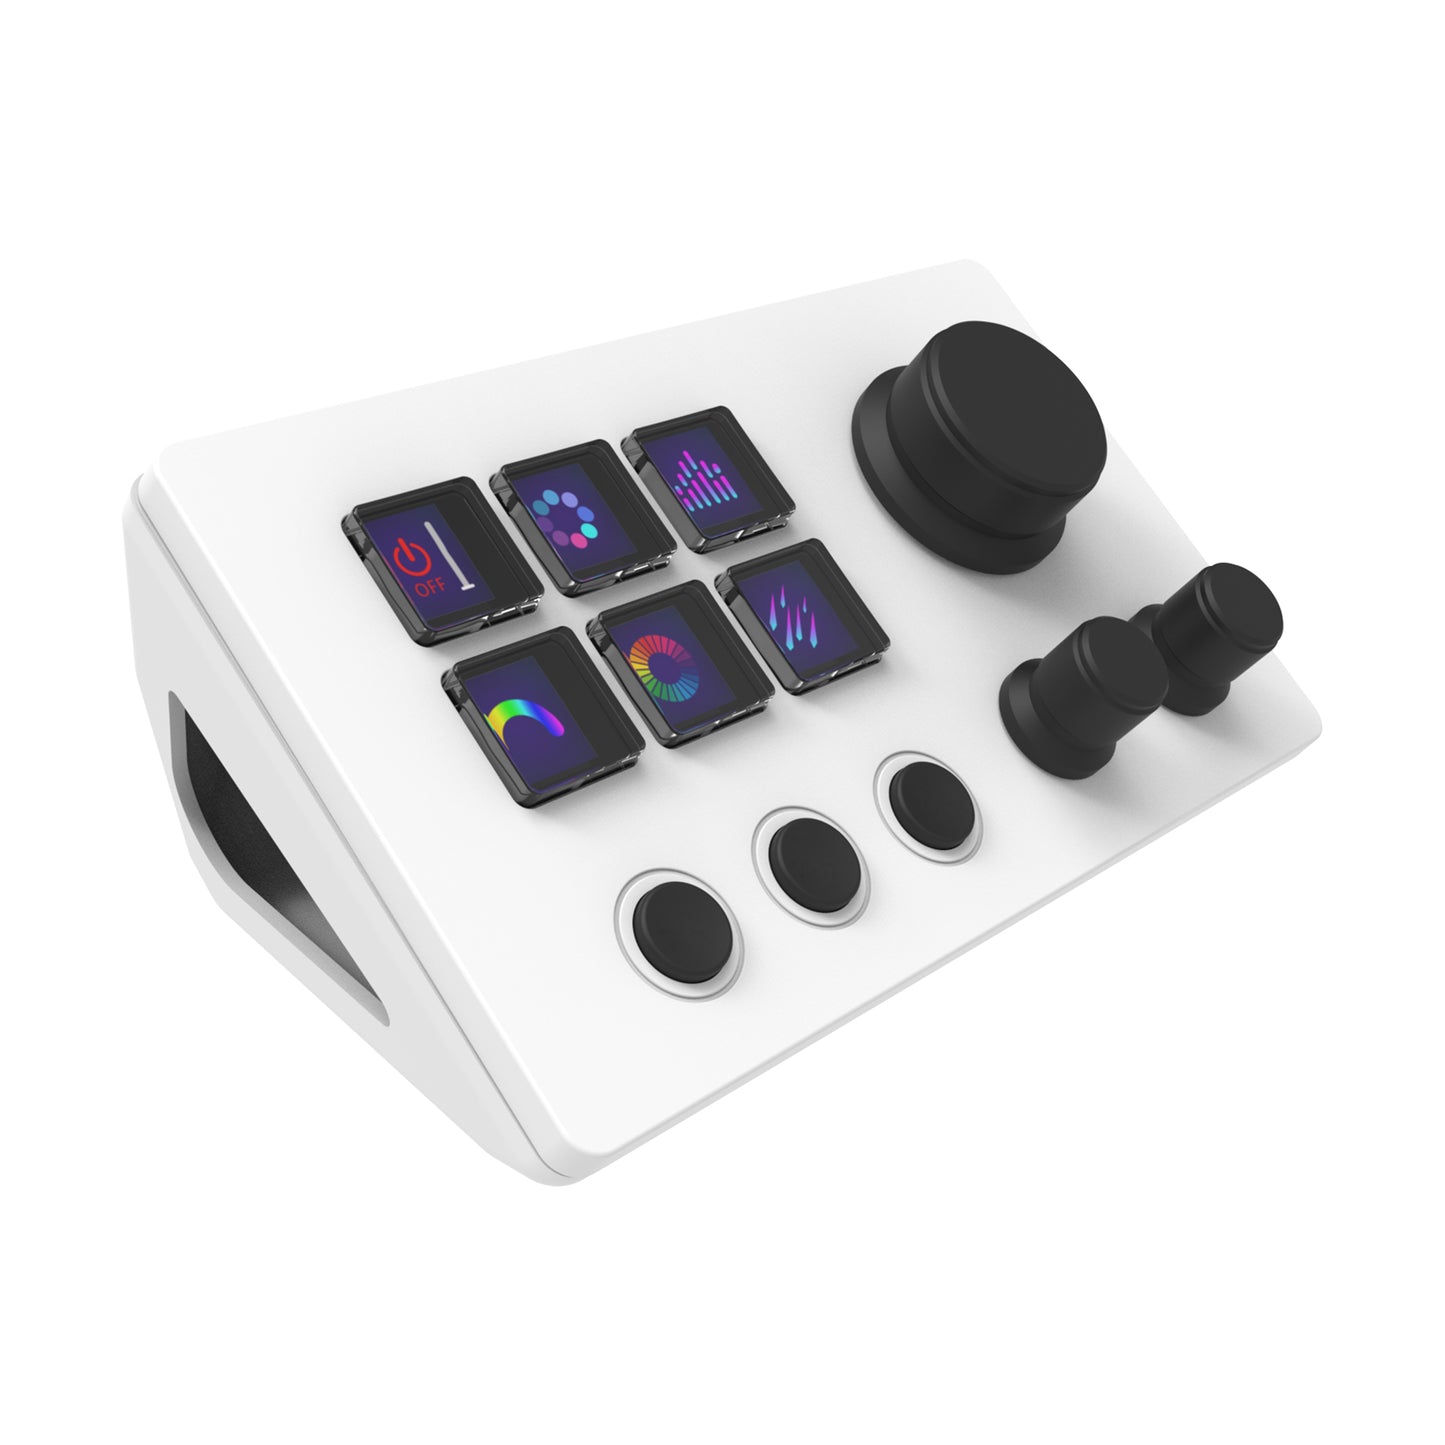 Stream Dock– The Custom Console for Live Streaming, Photo and Video Editing with Customizable Buttons, Dials and LED touchscreen